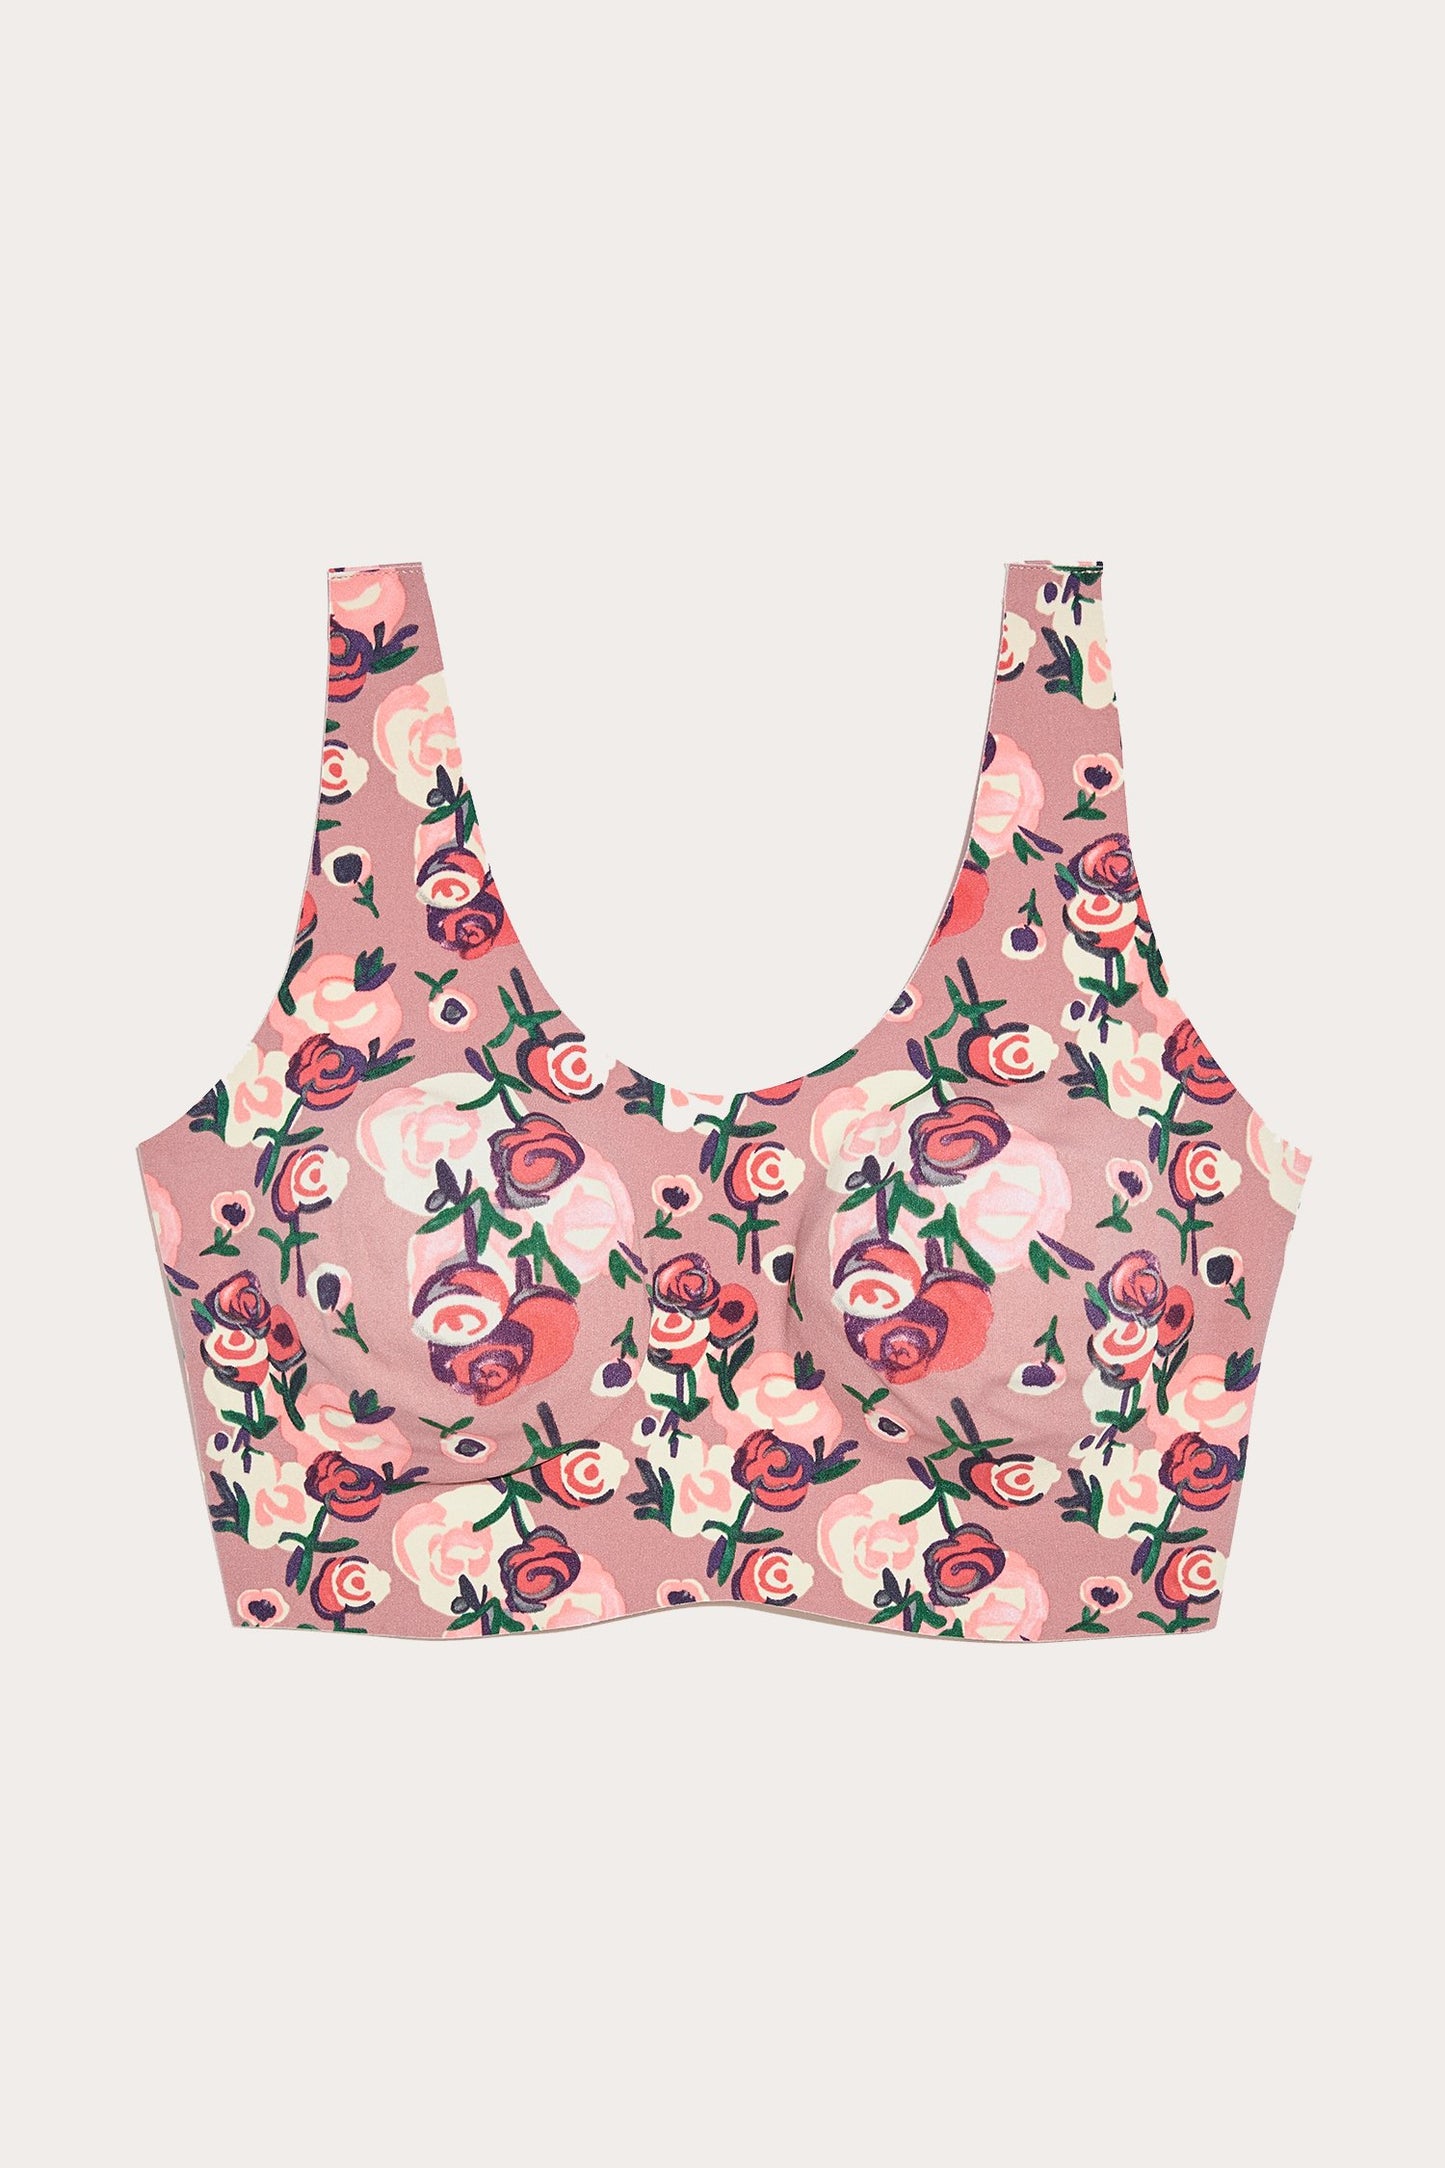 Anna Sui x Knix Lift Pullover Bra, dark rose, pattern of light and darkener pink roses with green